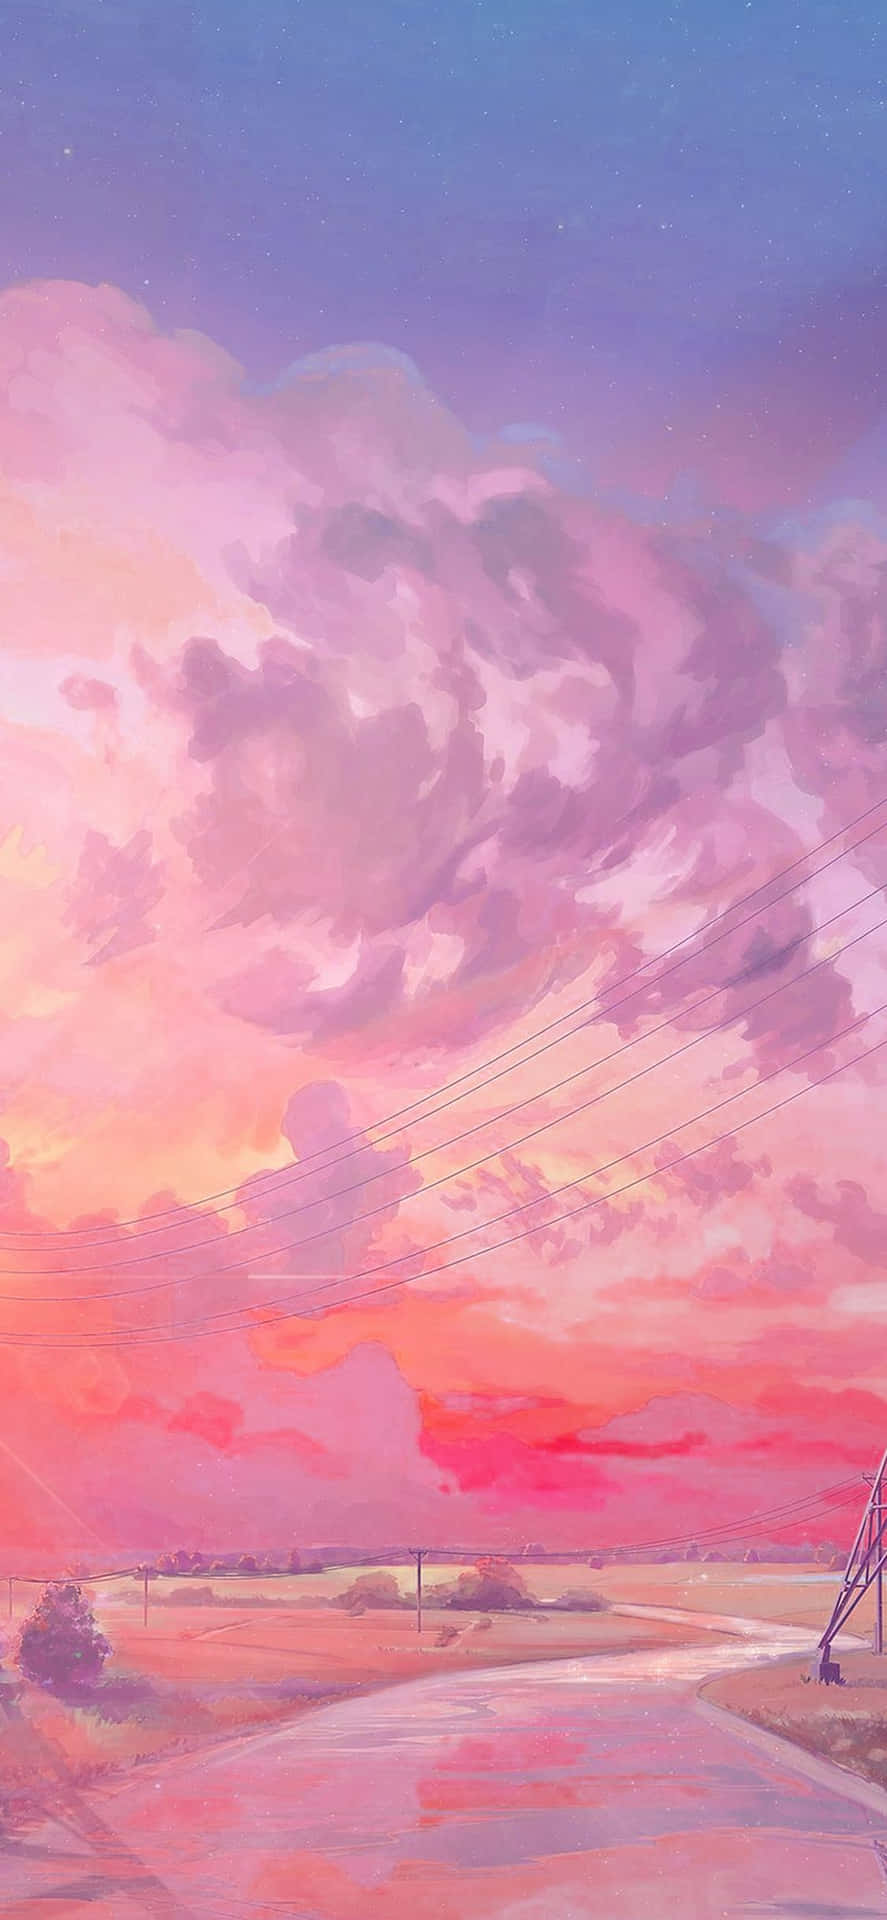 Let your imagination take flight with this vibrant Pink Anime background